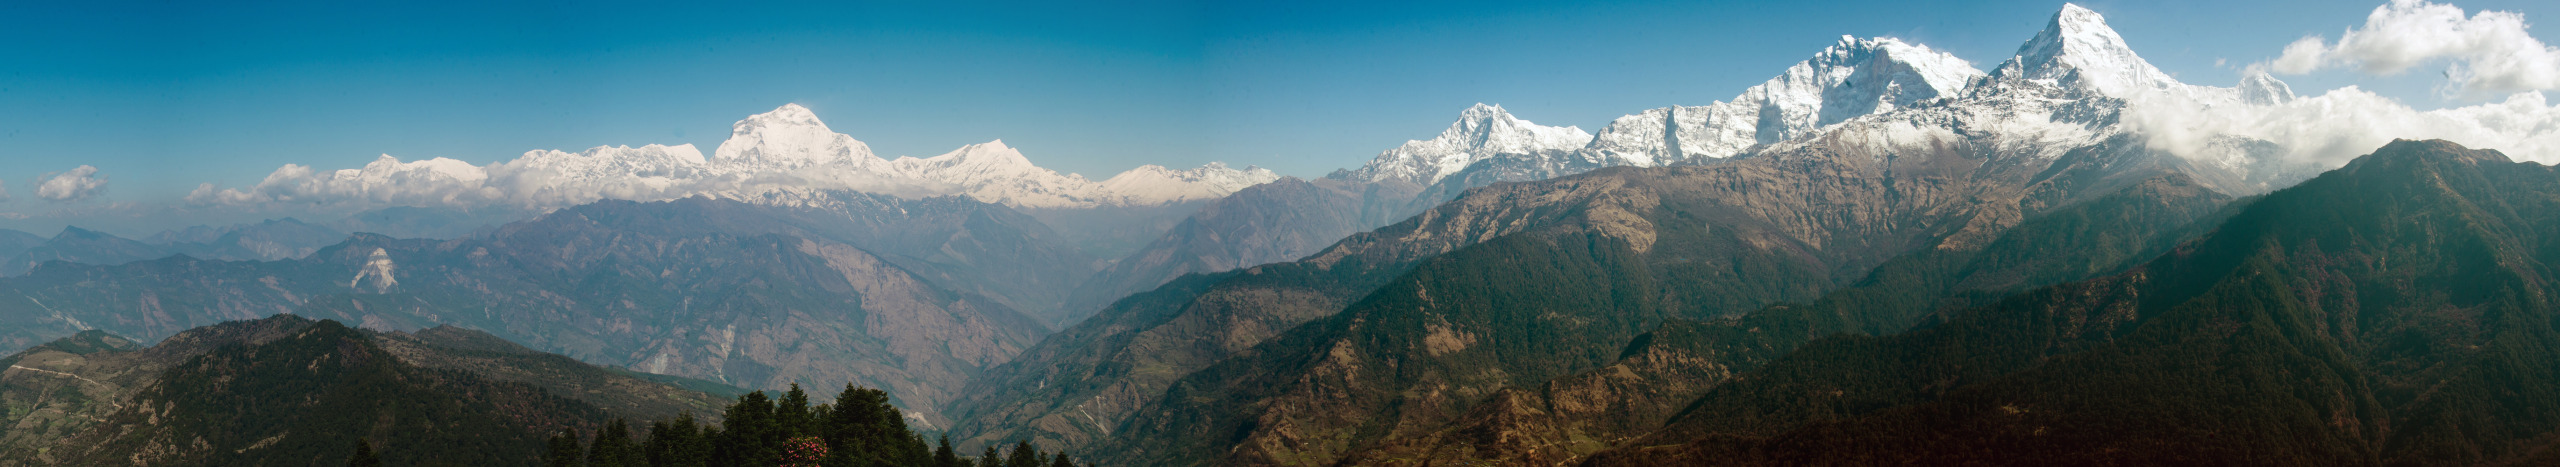 I spent my last week up in the Himalayas. There, I popped my 4,000 meter cherry (and surprisingly not my ears!) I also shot my first panorama.
This is the Annapurna mountain range – crowned by Annapurna I, the tenth highest and arguable one of the...